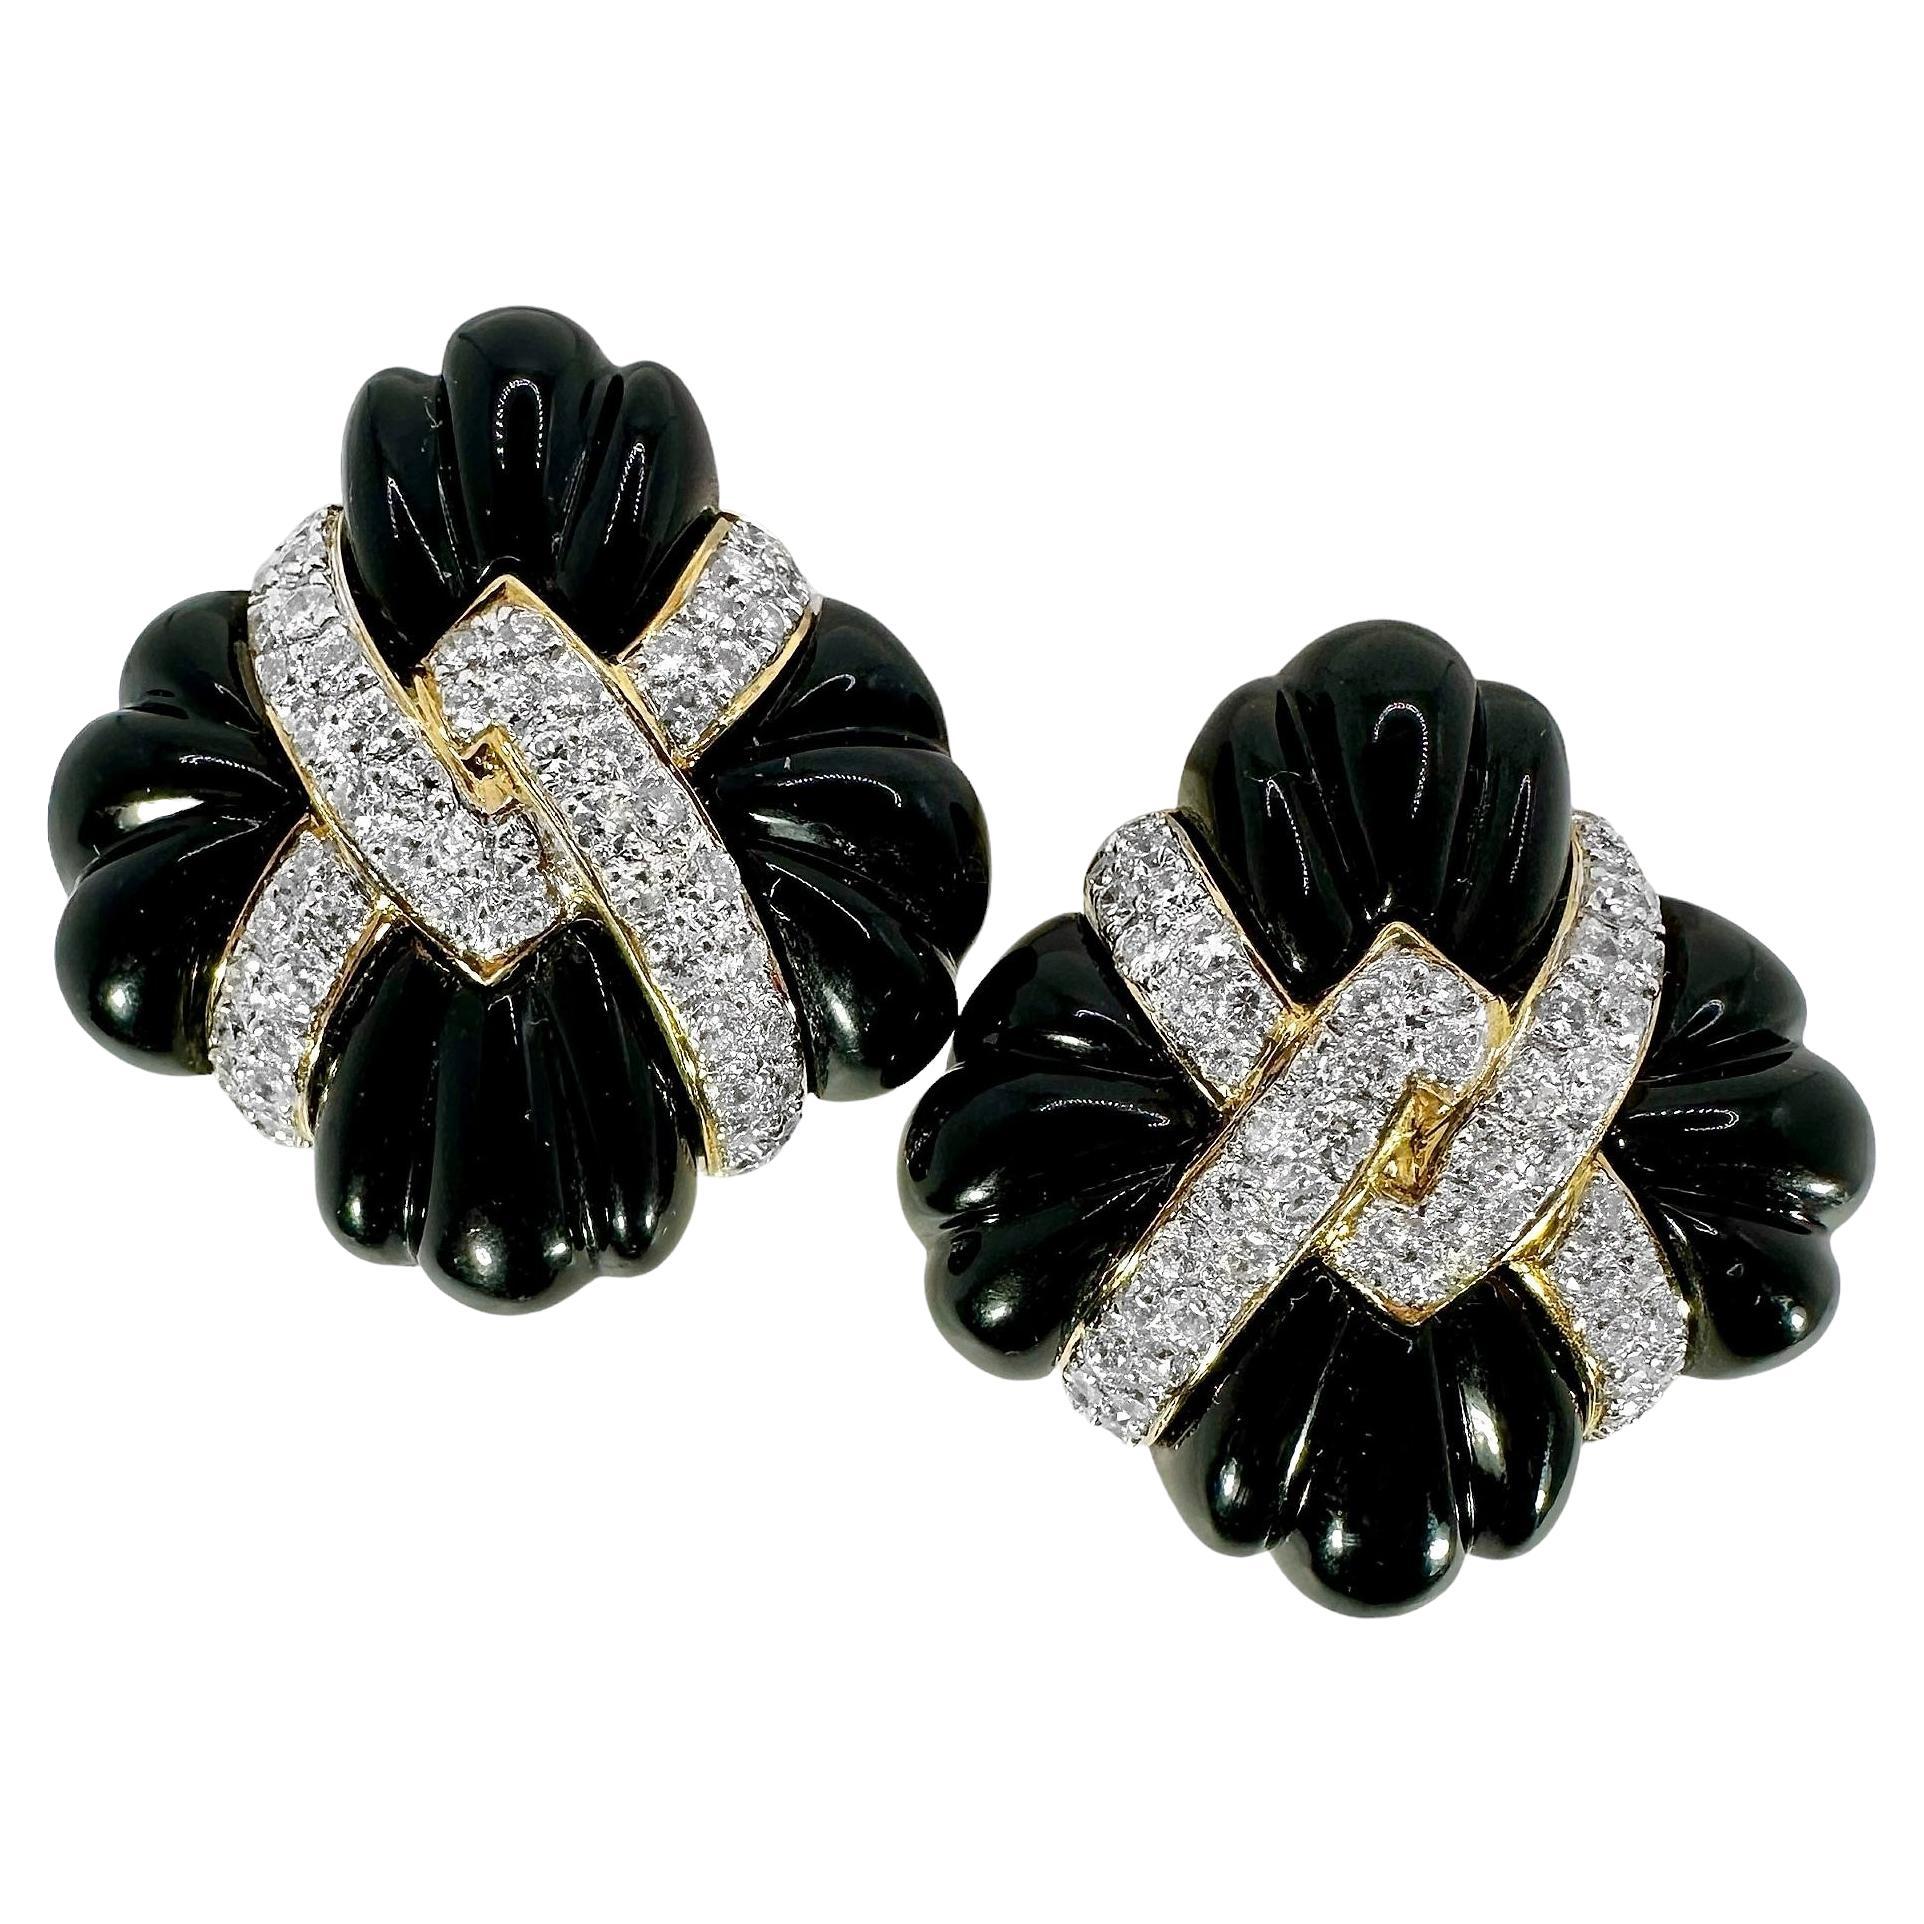 Exquisitely Designed Gold, Diamond and Fluted Onyx Fashion Earrings 1.25 Inches